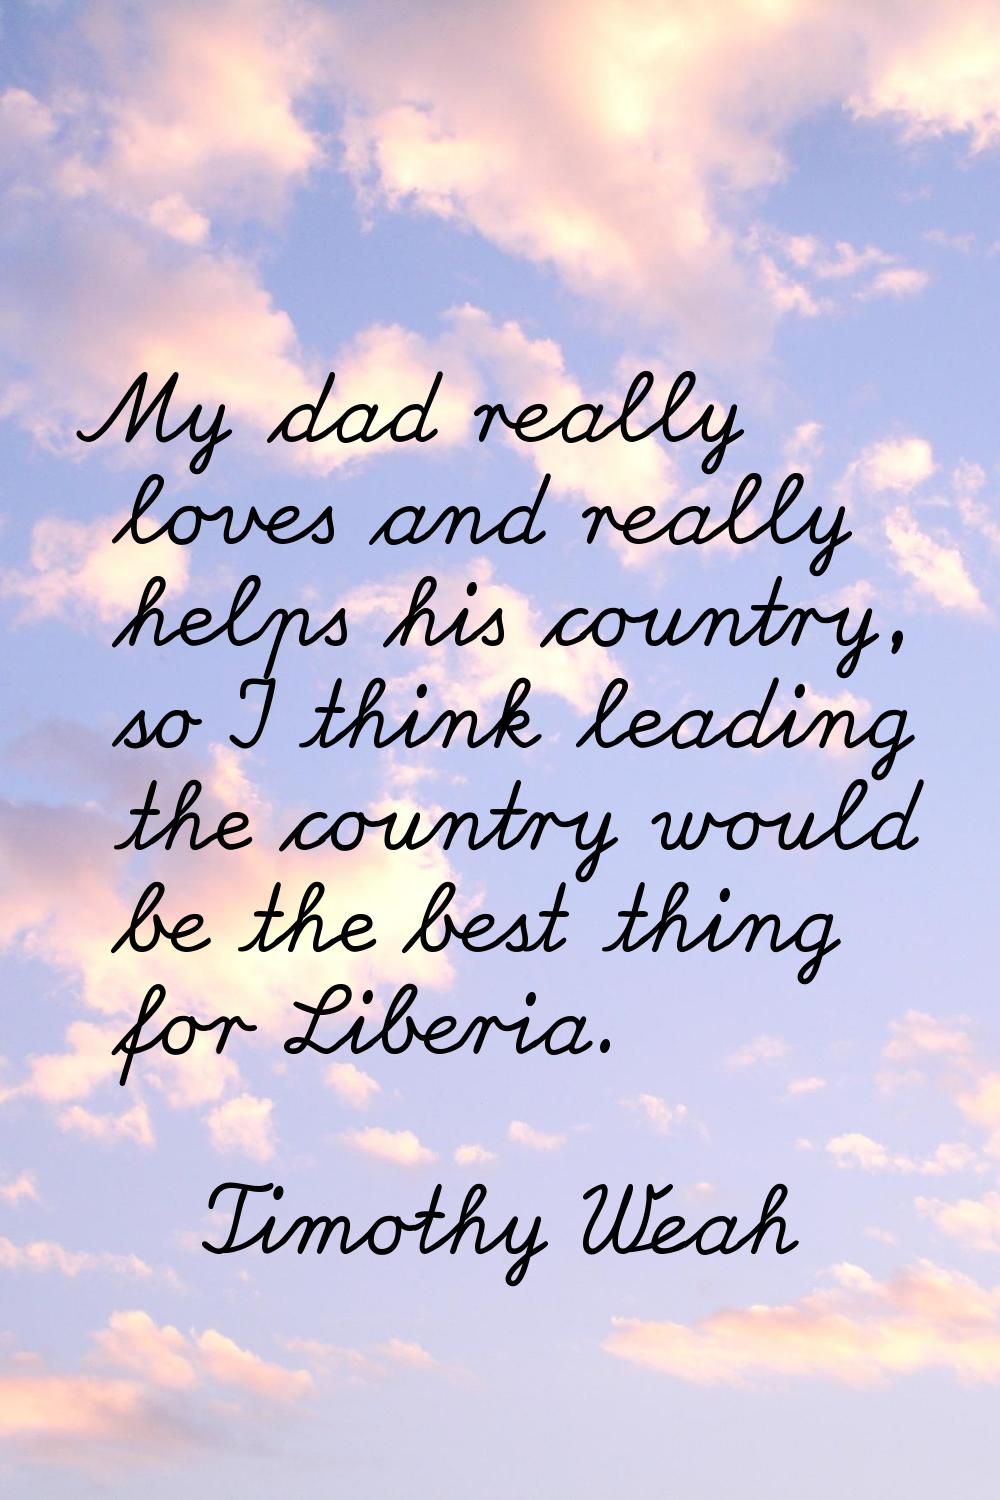 My dad really loves and really helps his country, so I think leading the country would be the best 